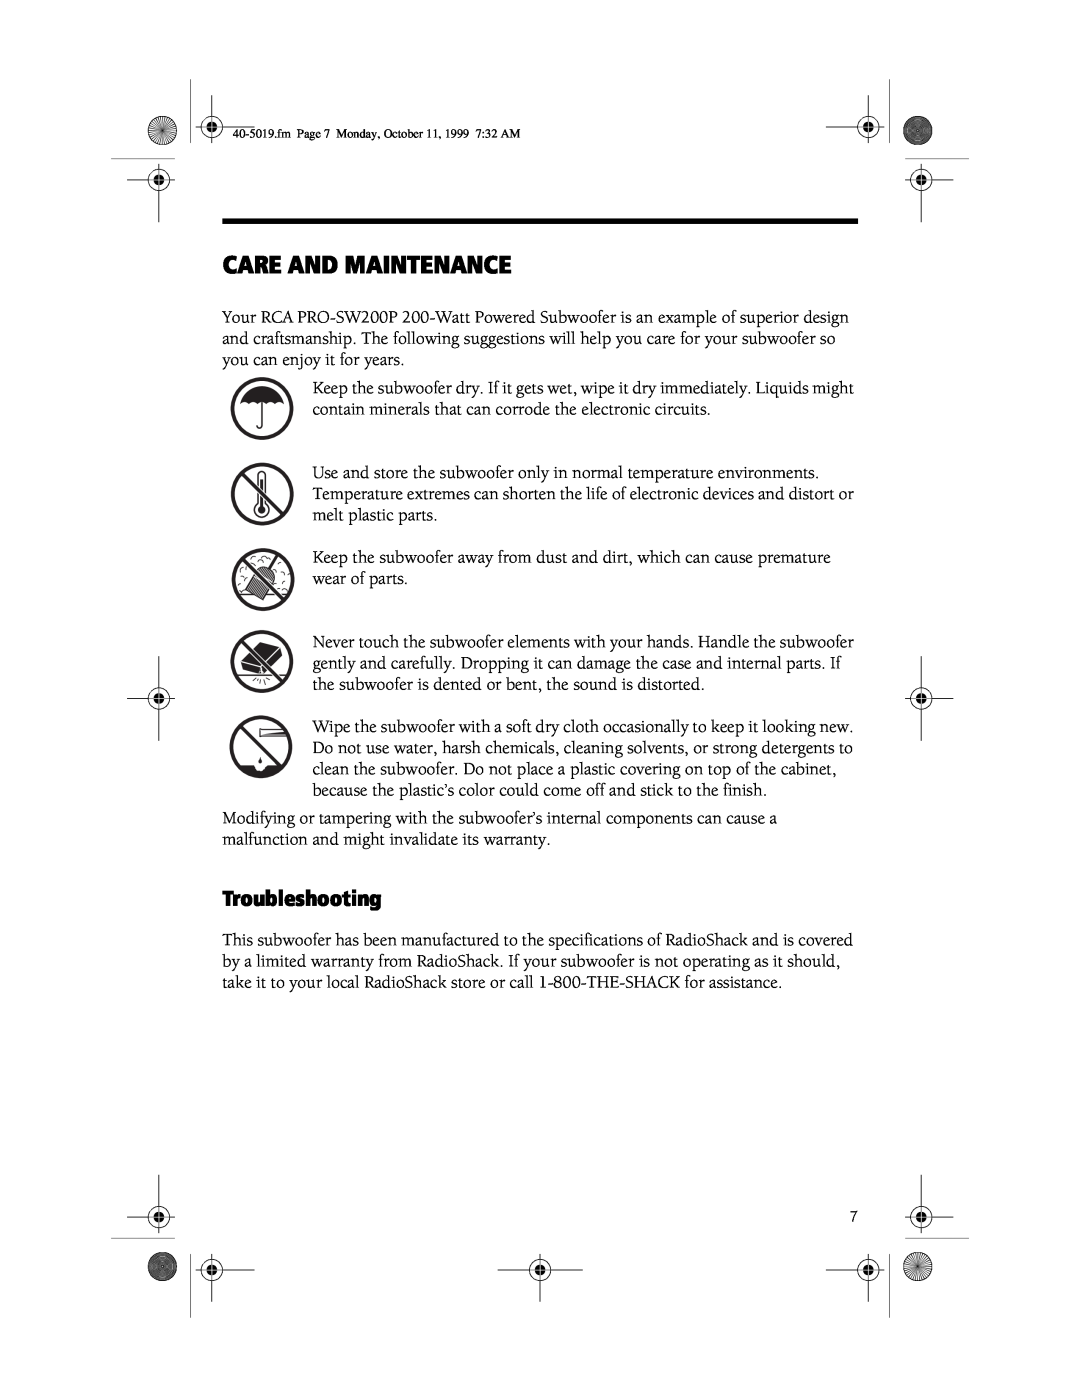 RCA 40-5019, PRO-SW200P manual Care And Maintenance, Troubleshooting 